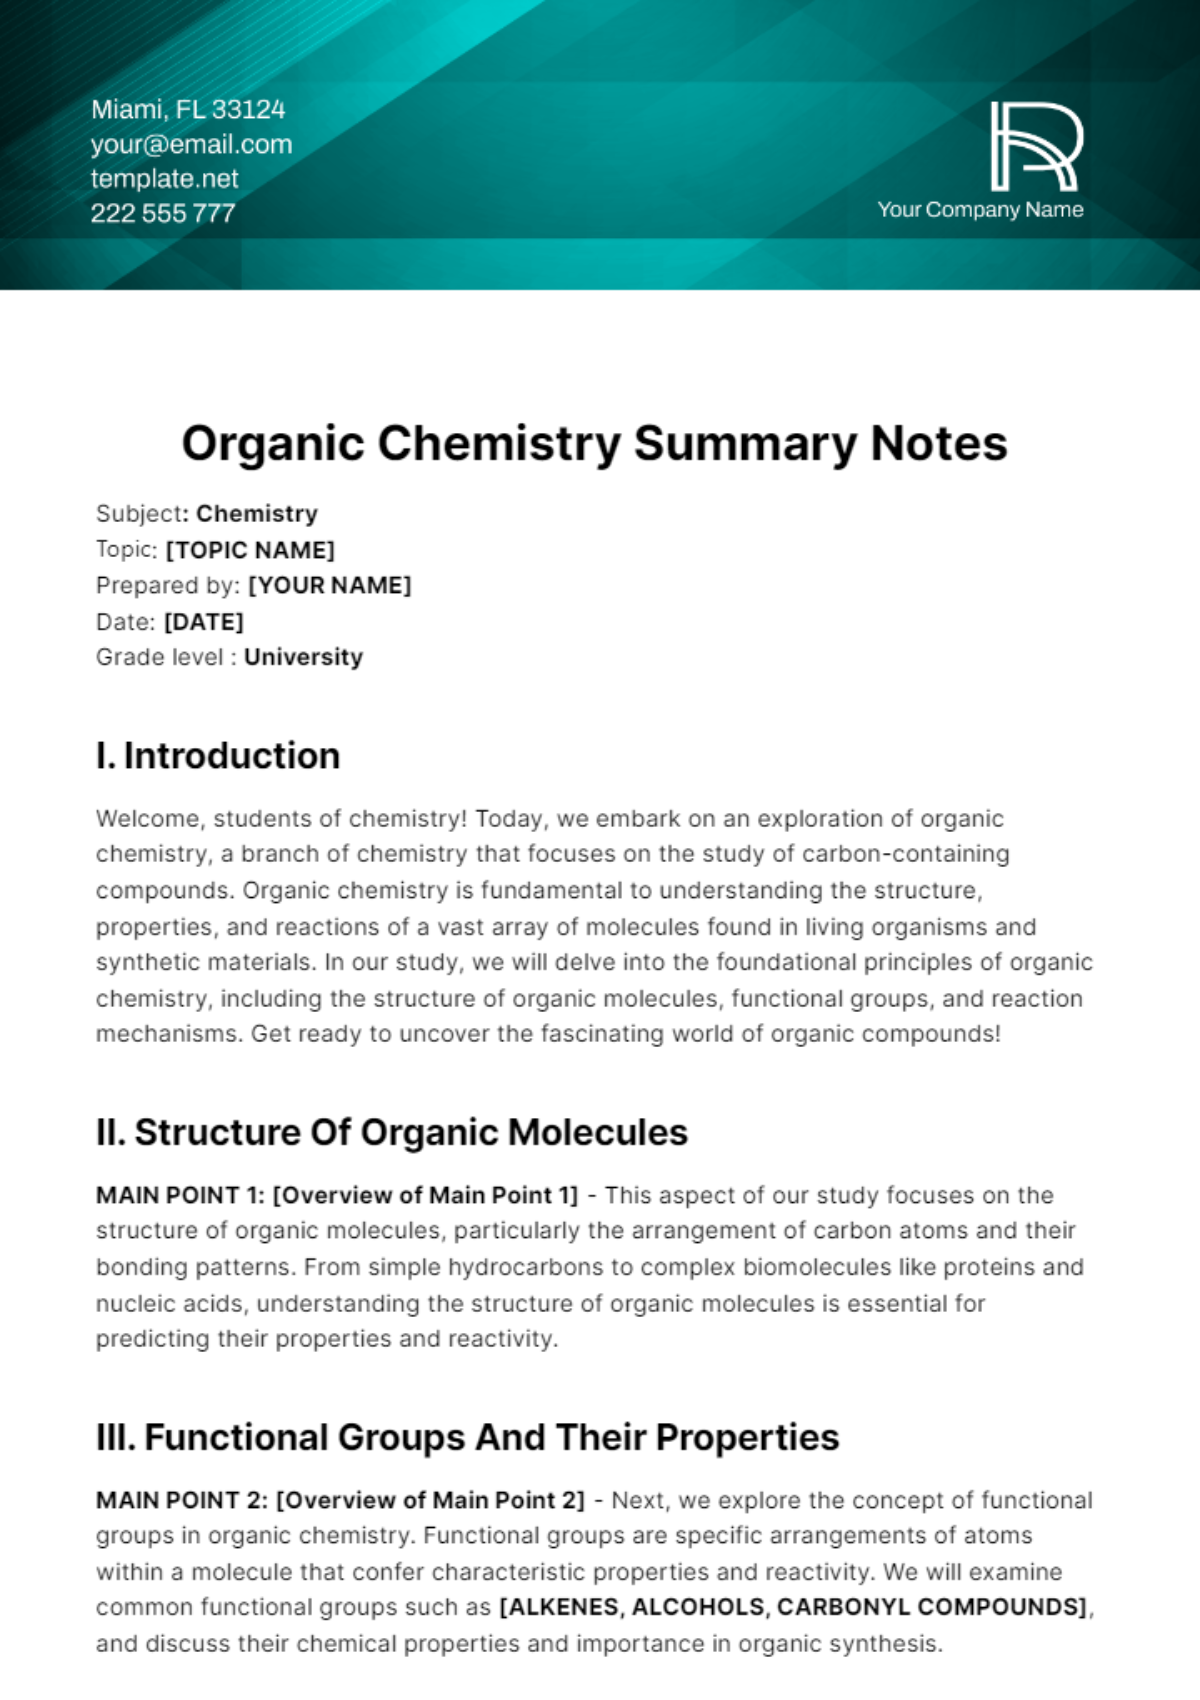 Organic Chemistry Summary Notes Template